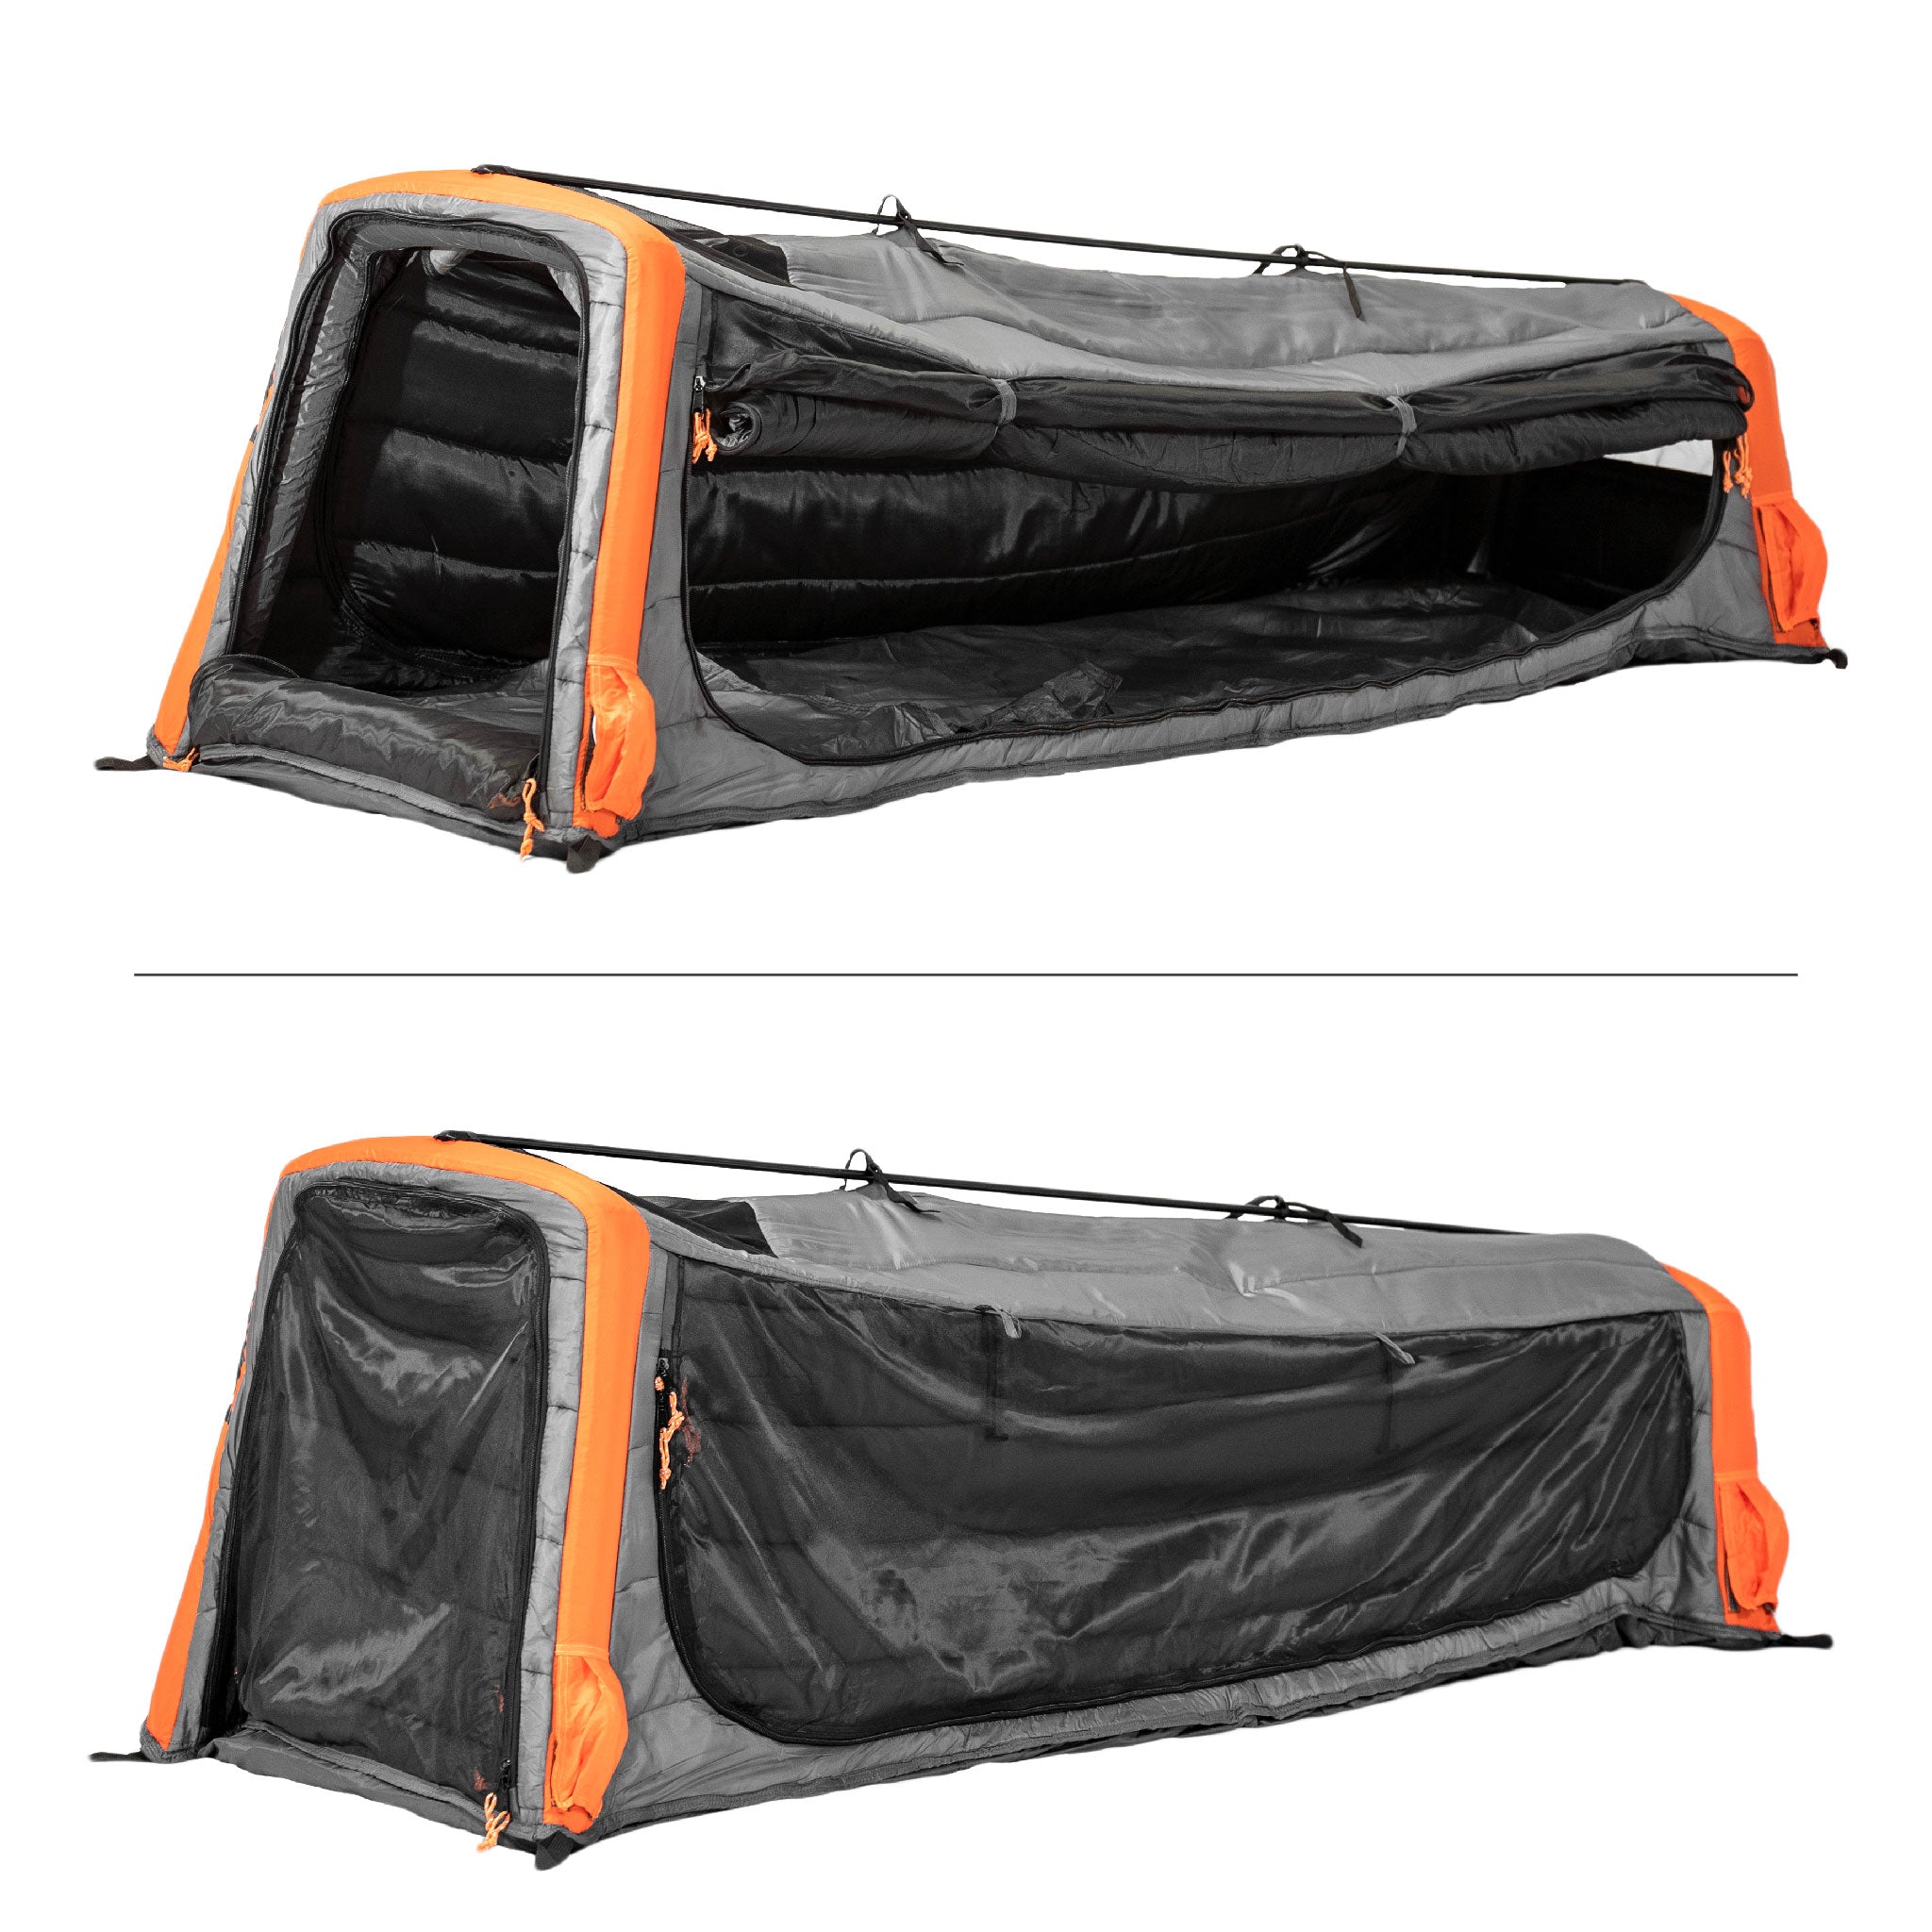 CULLA SOLO | 1 PERSON INSULATED INNER TENT WITH TEMPERATURE REGULATING, NOISE DAMPENING AND LIGHT BLOCKING FEATURES